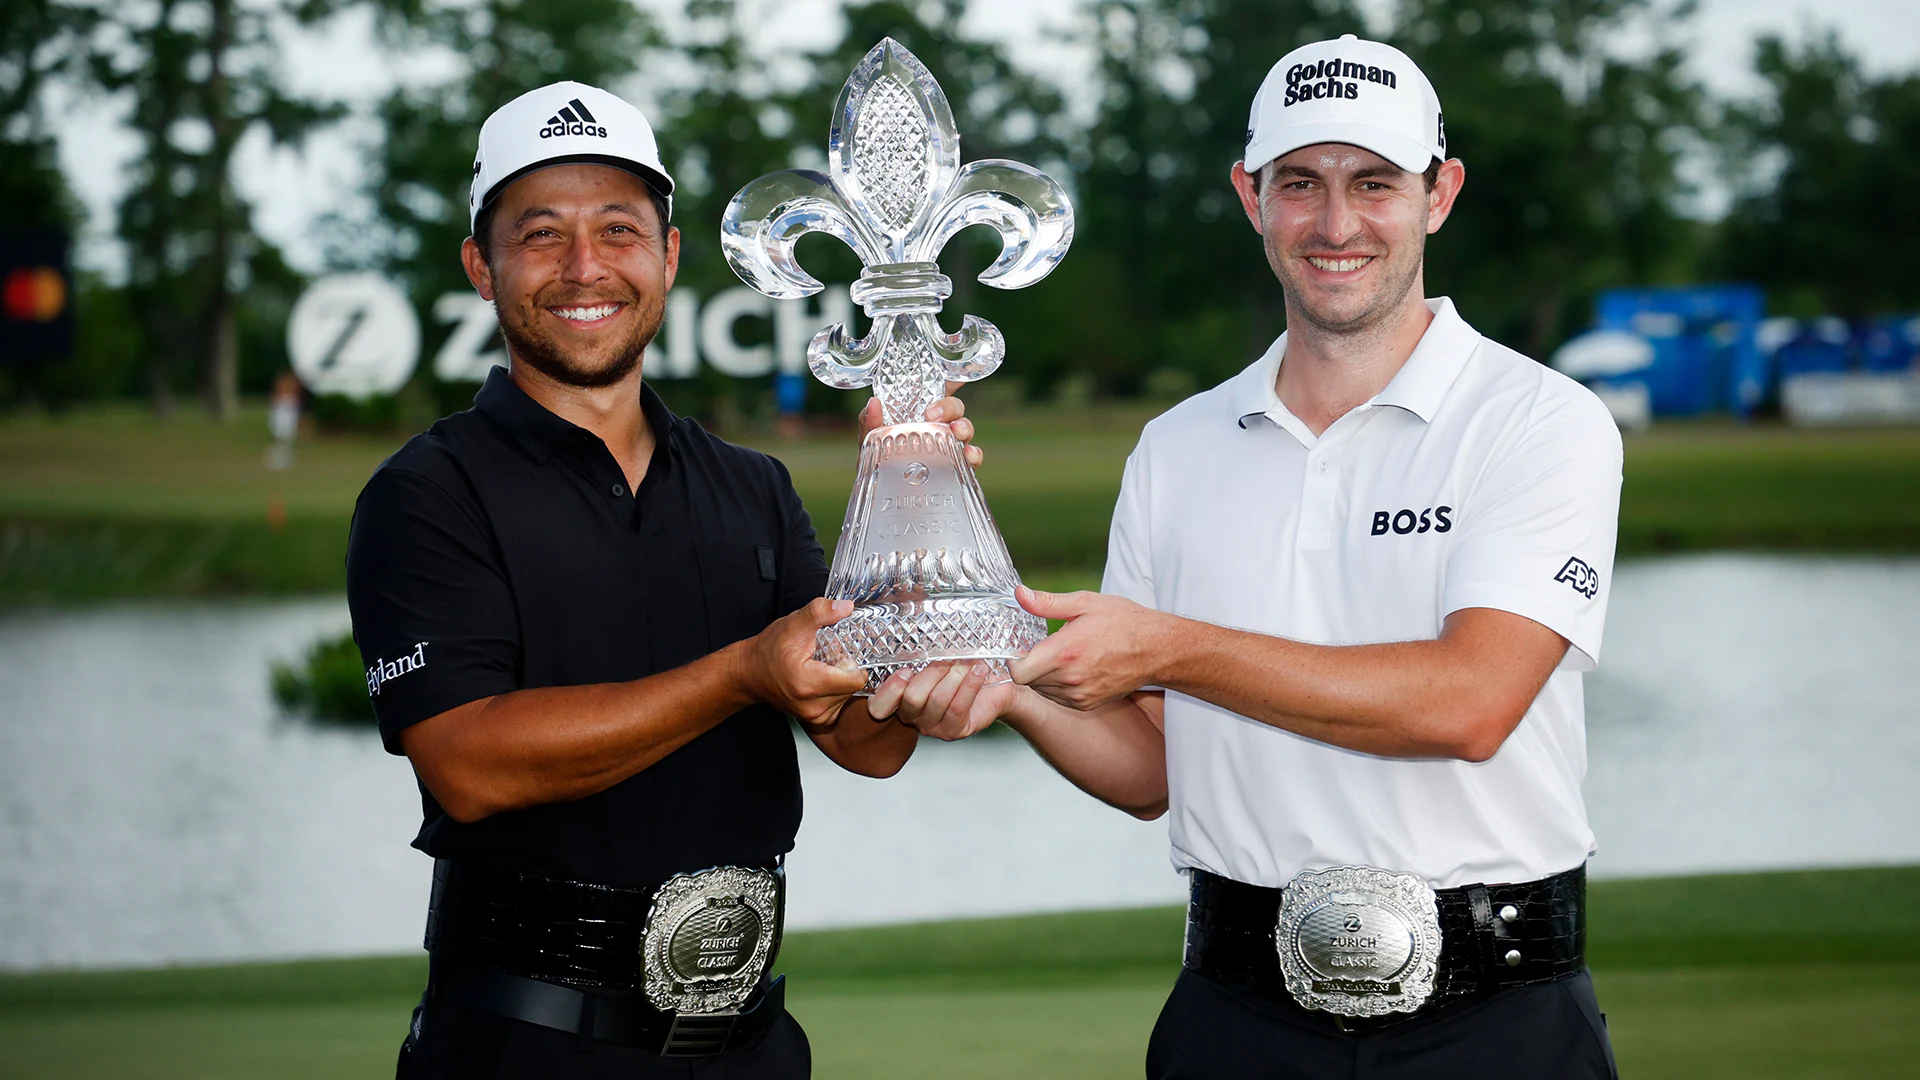 Patrick Cantlay/Xander Schauffele win Zurich Classic in record-setting performance